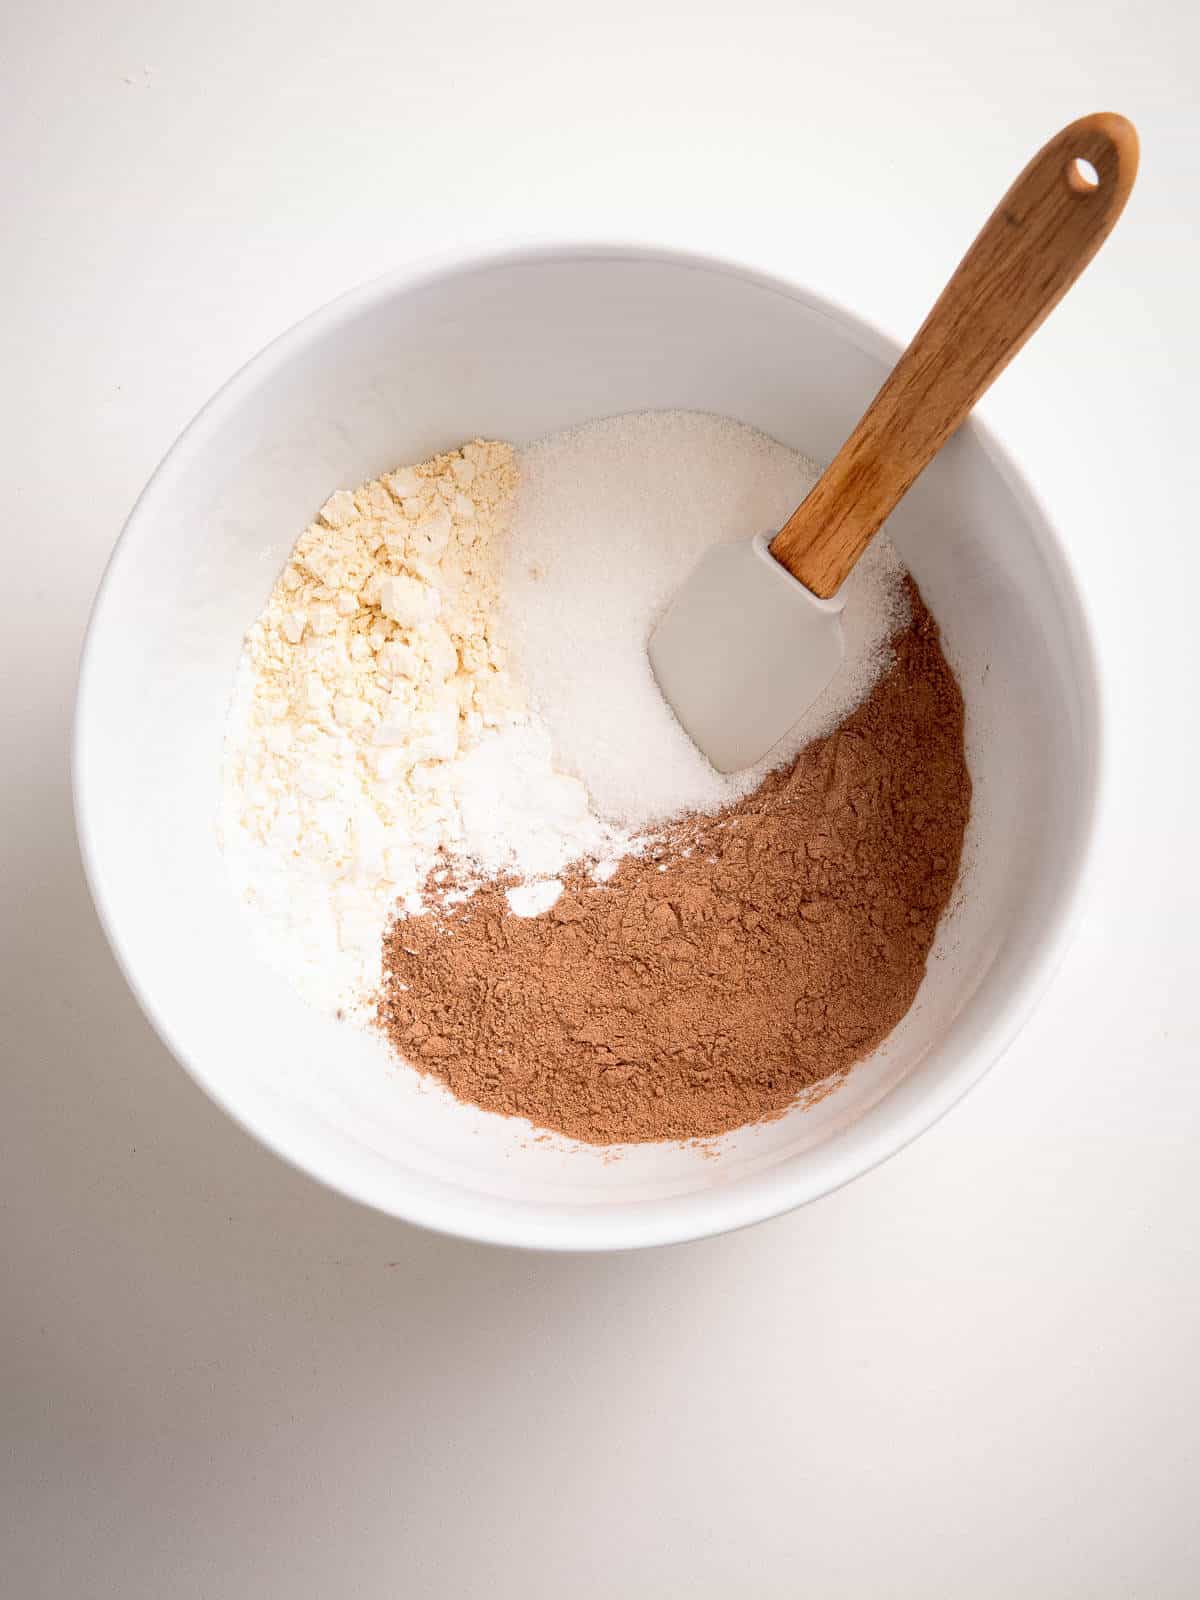 place the cocoa powder, chickpea flour with the cornstarch, sugar and baking powder in a bowl.